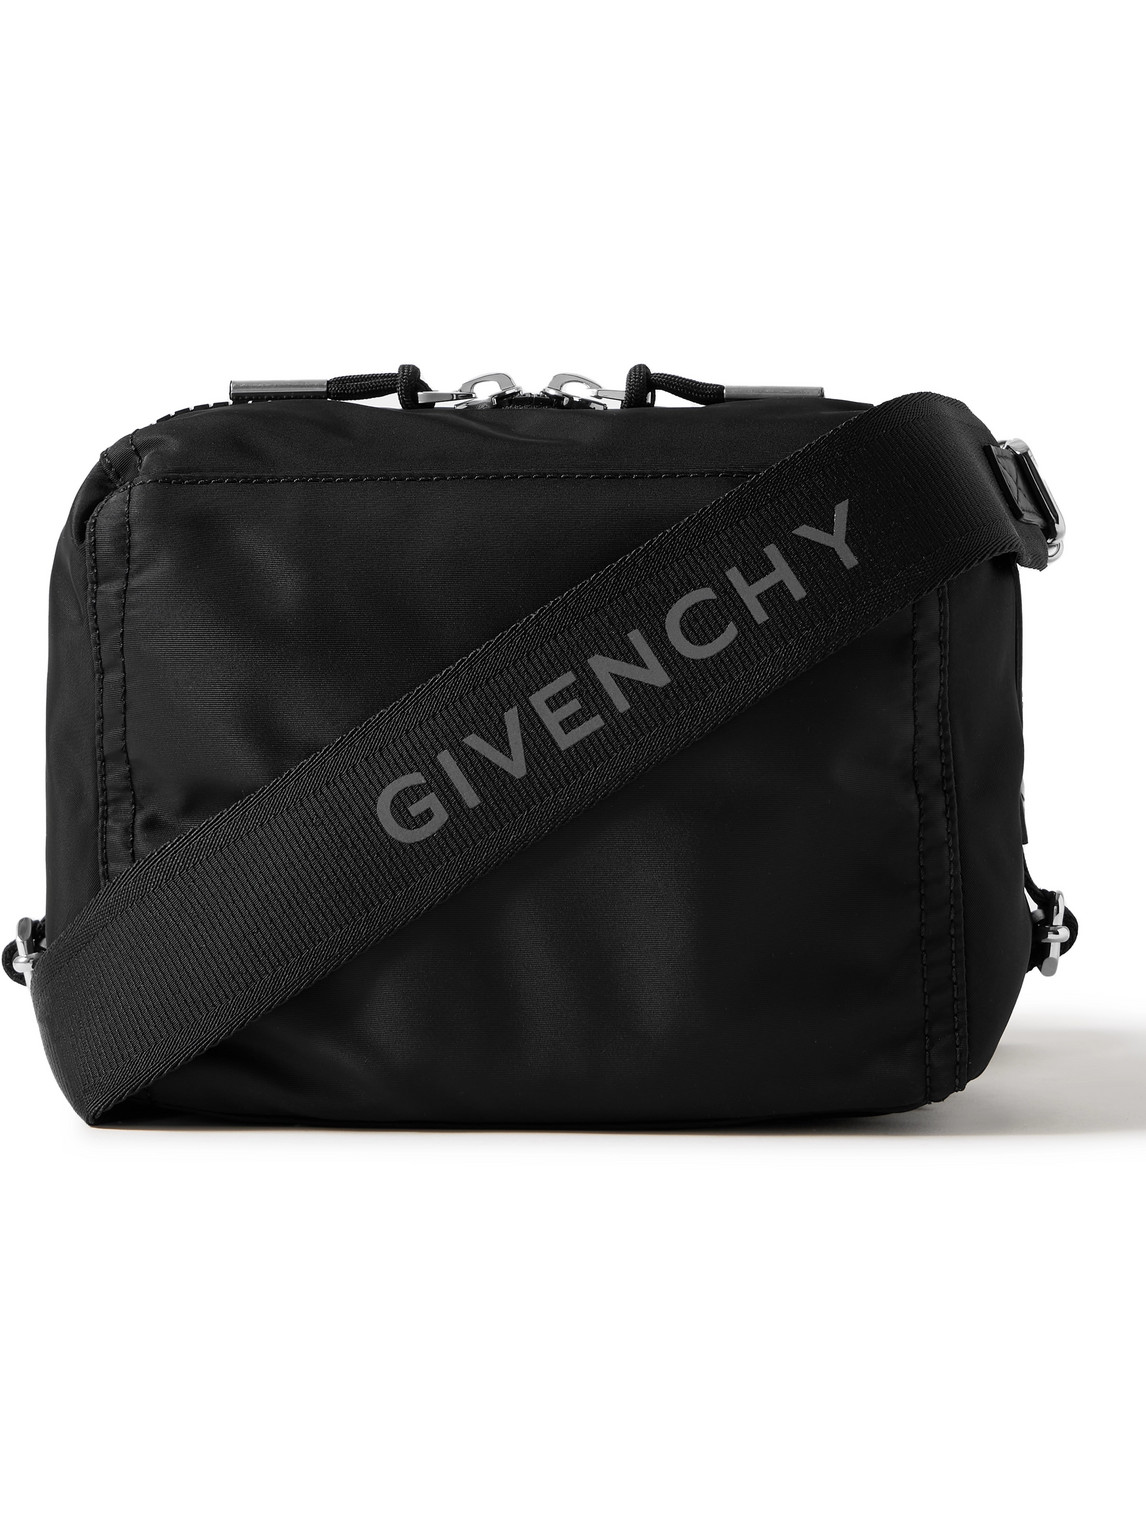 Givenchy Pandora Small Leather-trimmed Nylon Messenger Bag In Black